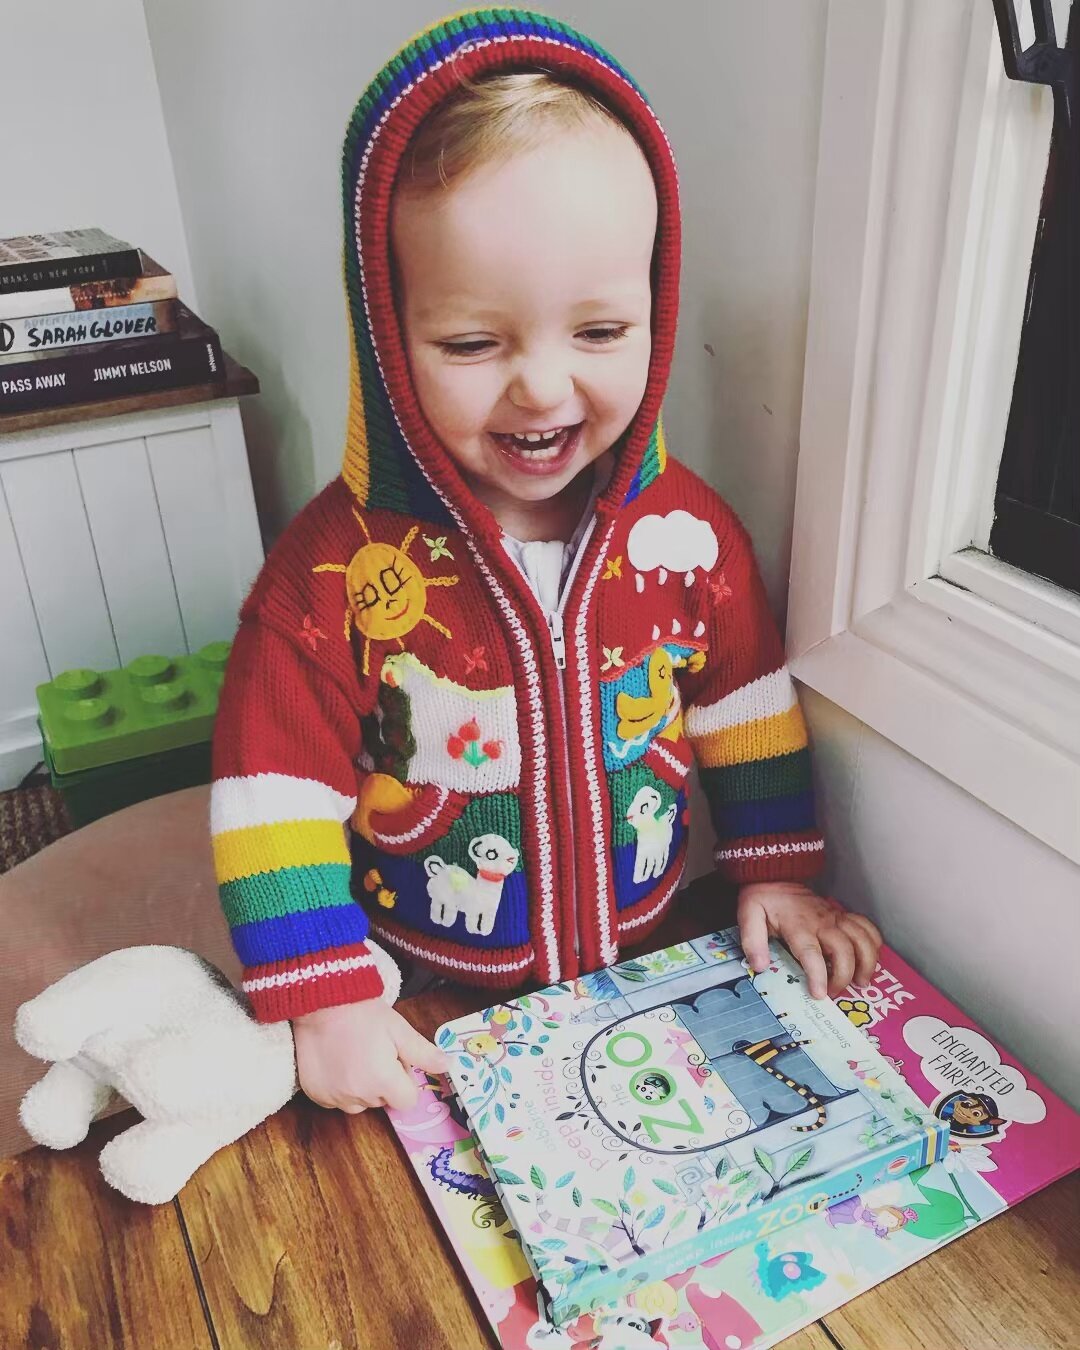 The sweetest little cardi from Cousin Zac. Handmade in Mexico. 〰️❤️